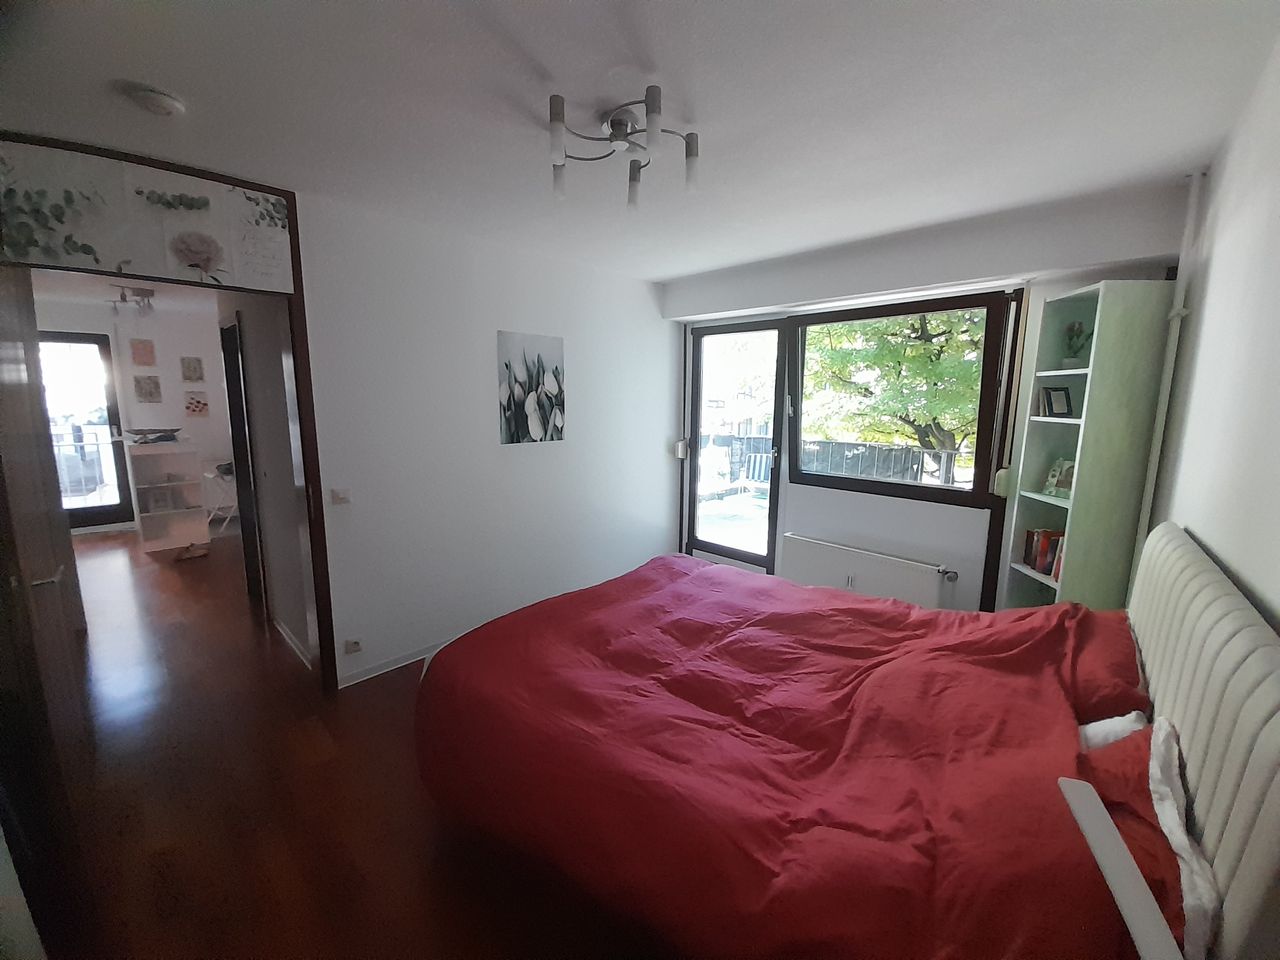 Furnished dream apartment in the city center - best location Stuttgart